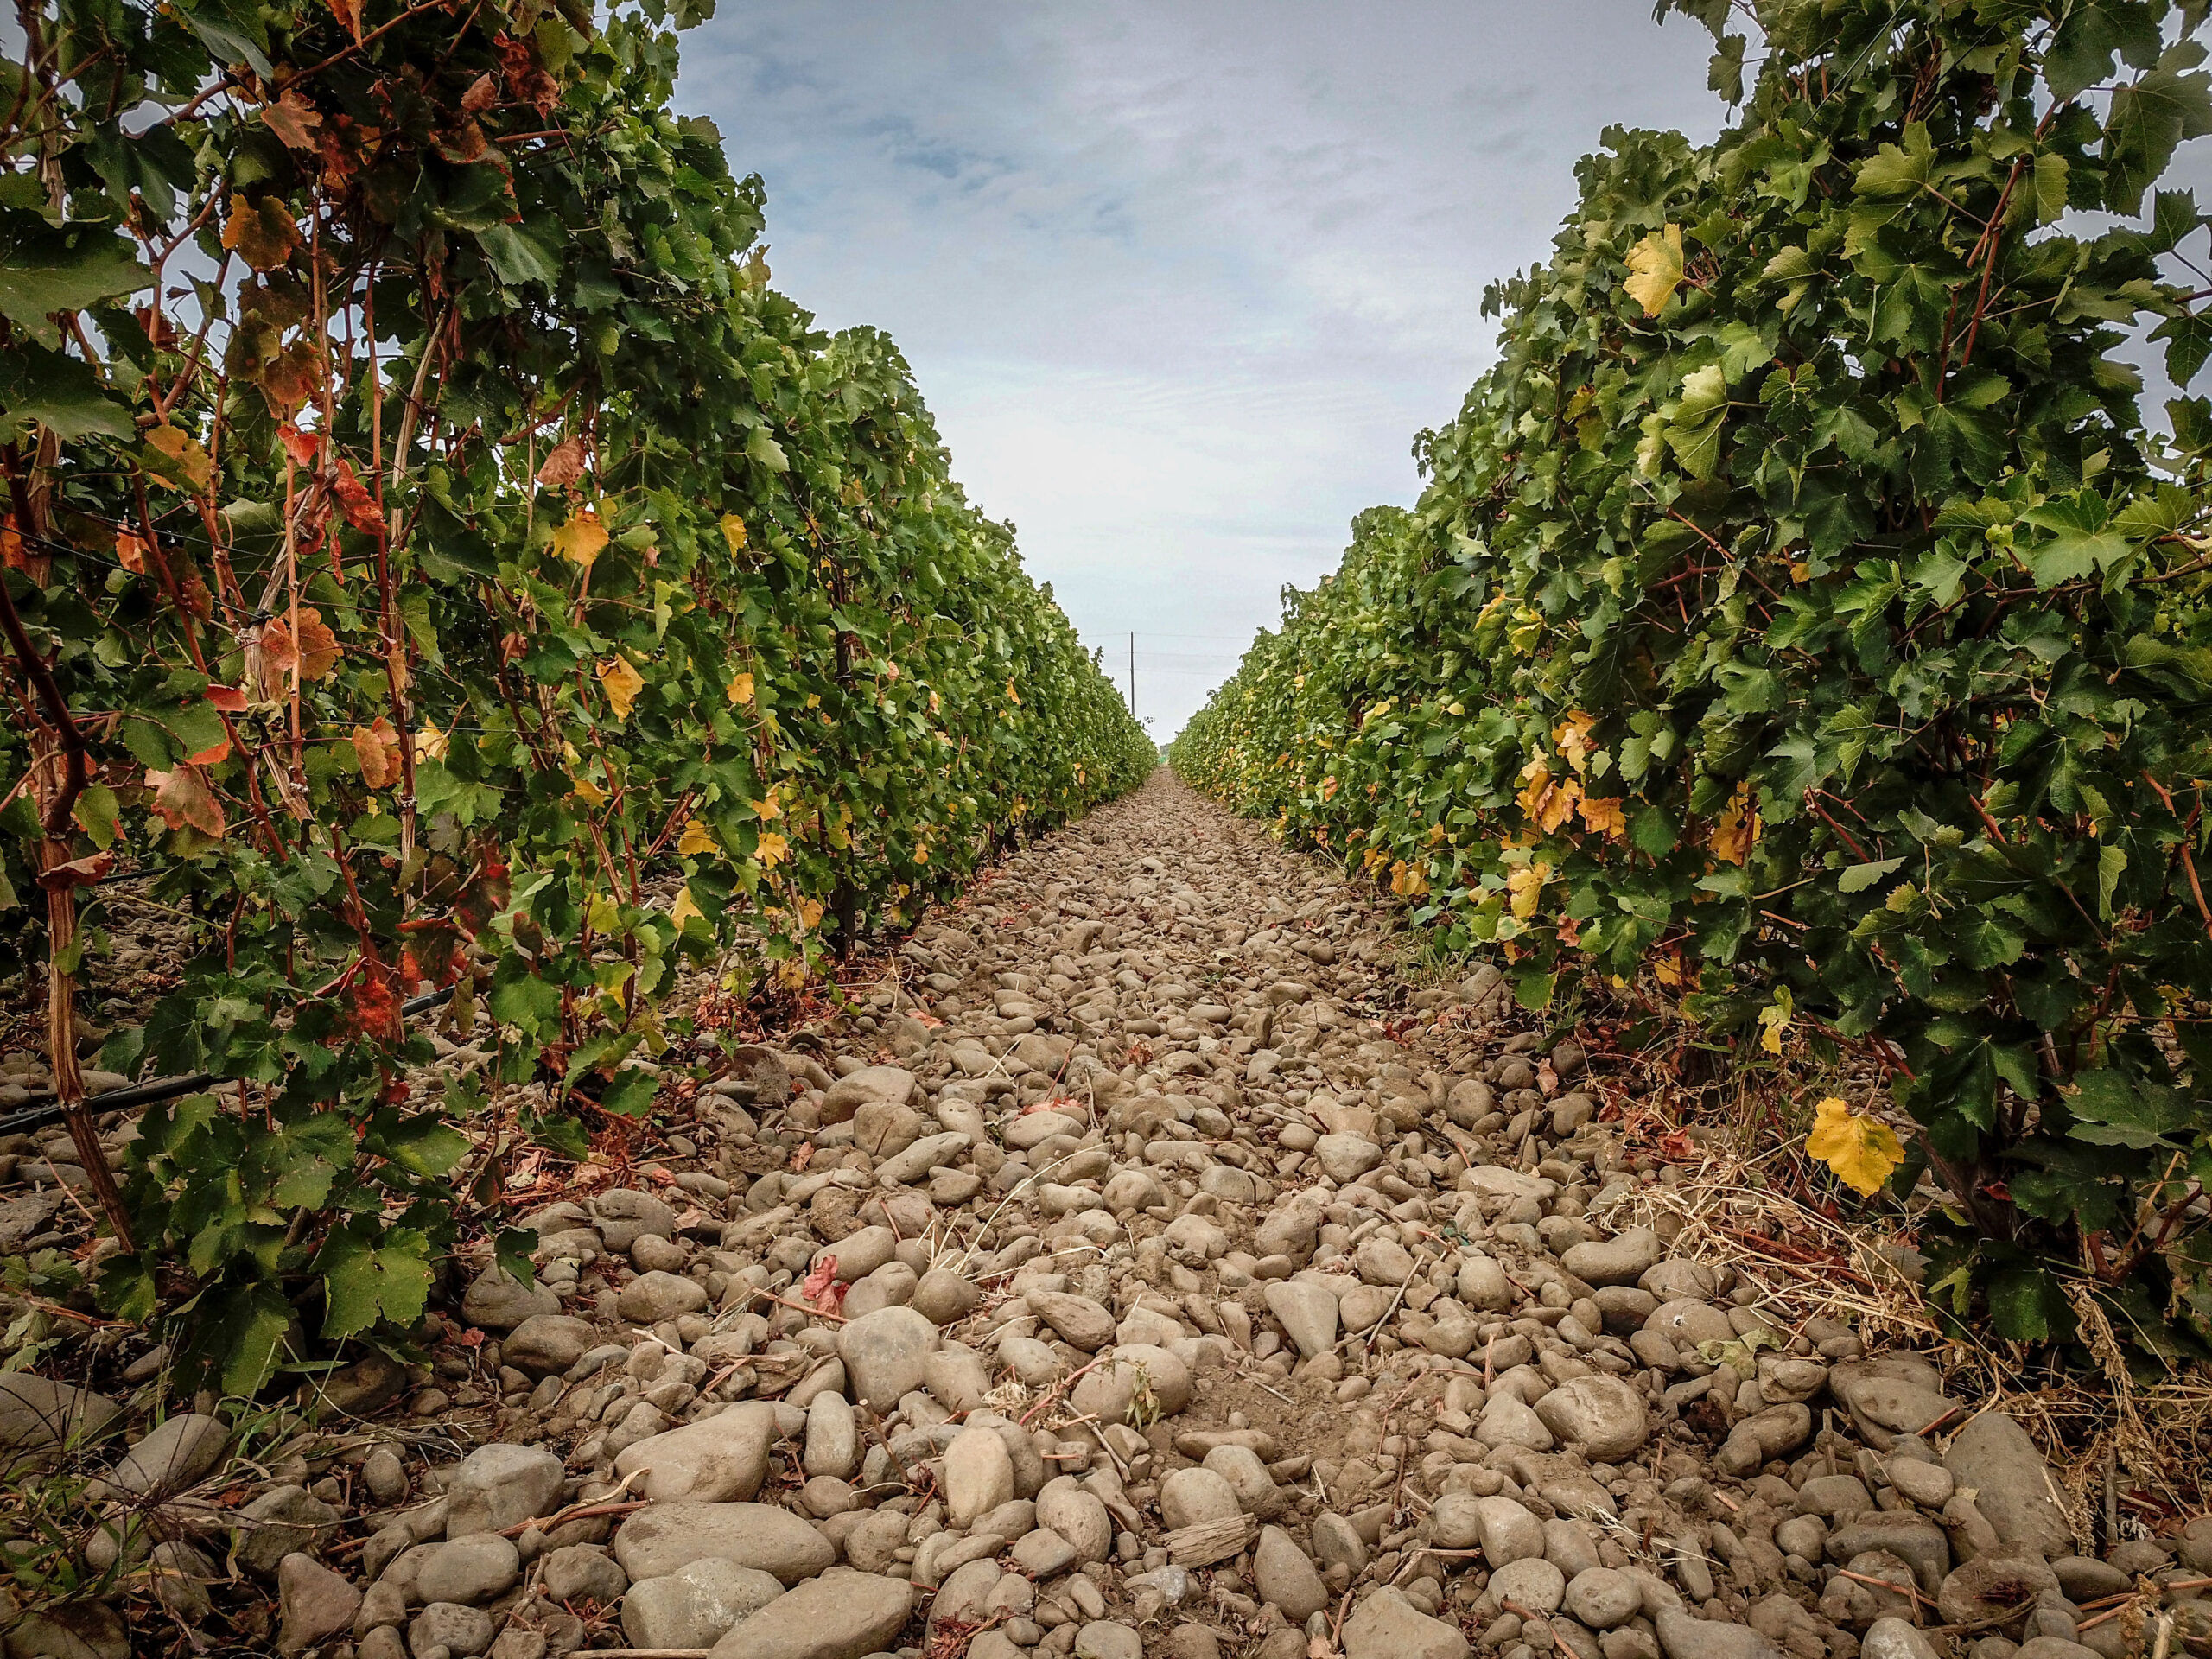 Rocks line the space between rows of leafy grape vines. Some leaves are yellow and most of green, and the sky above is grey with light cloud cover.